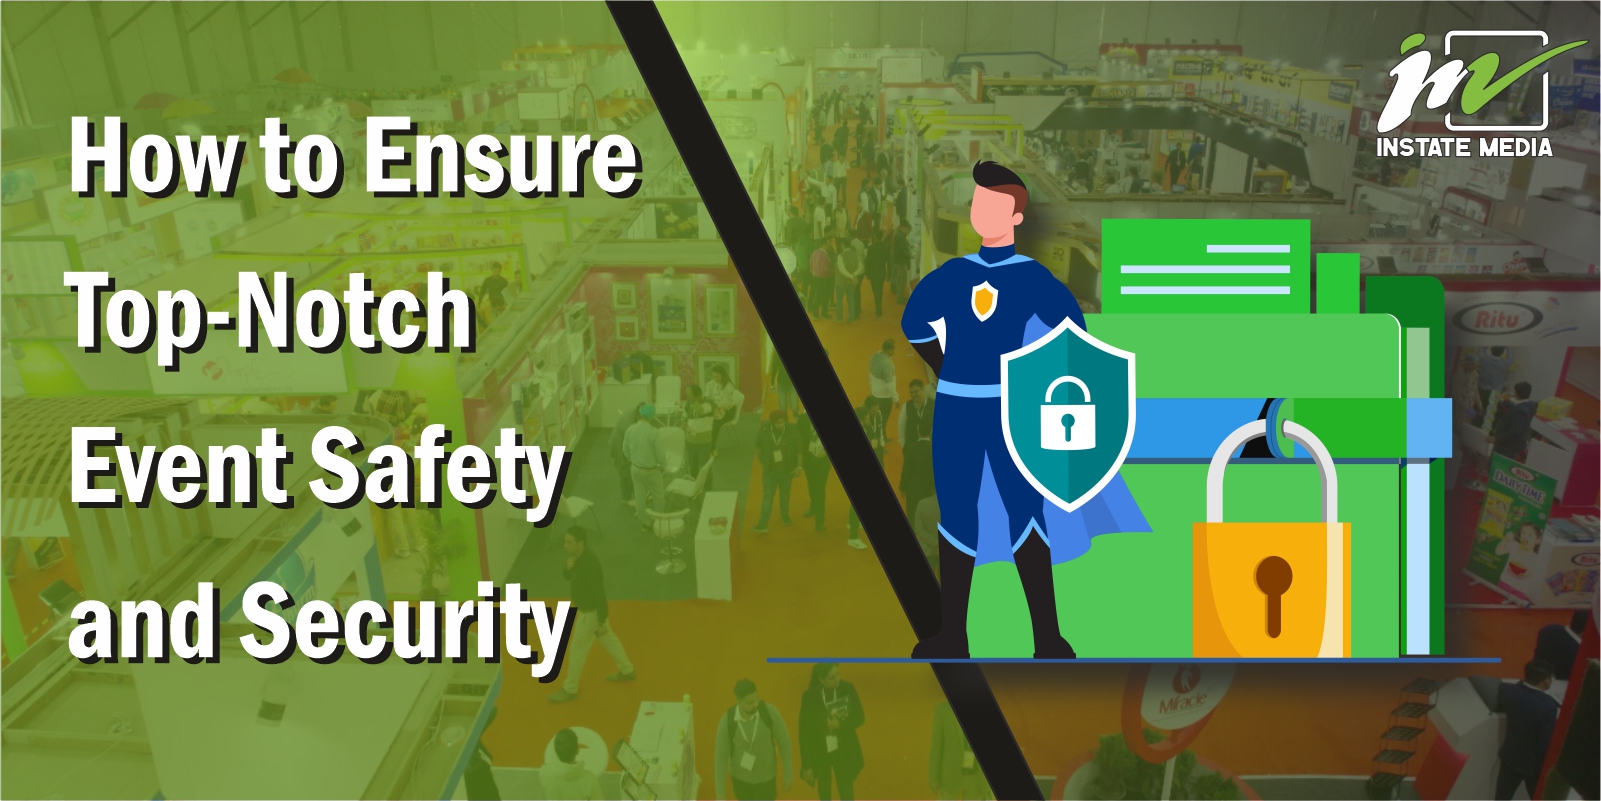 How to Ensure Top-Notch Event Safety and Security